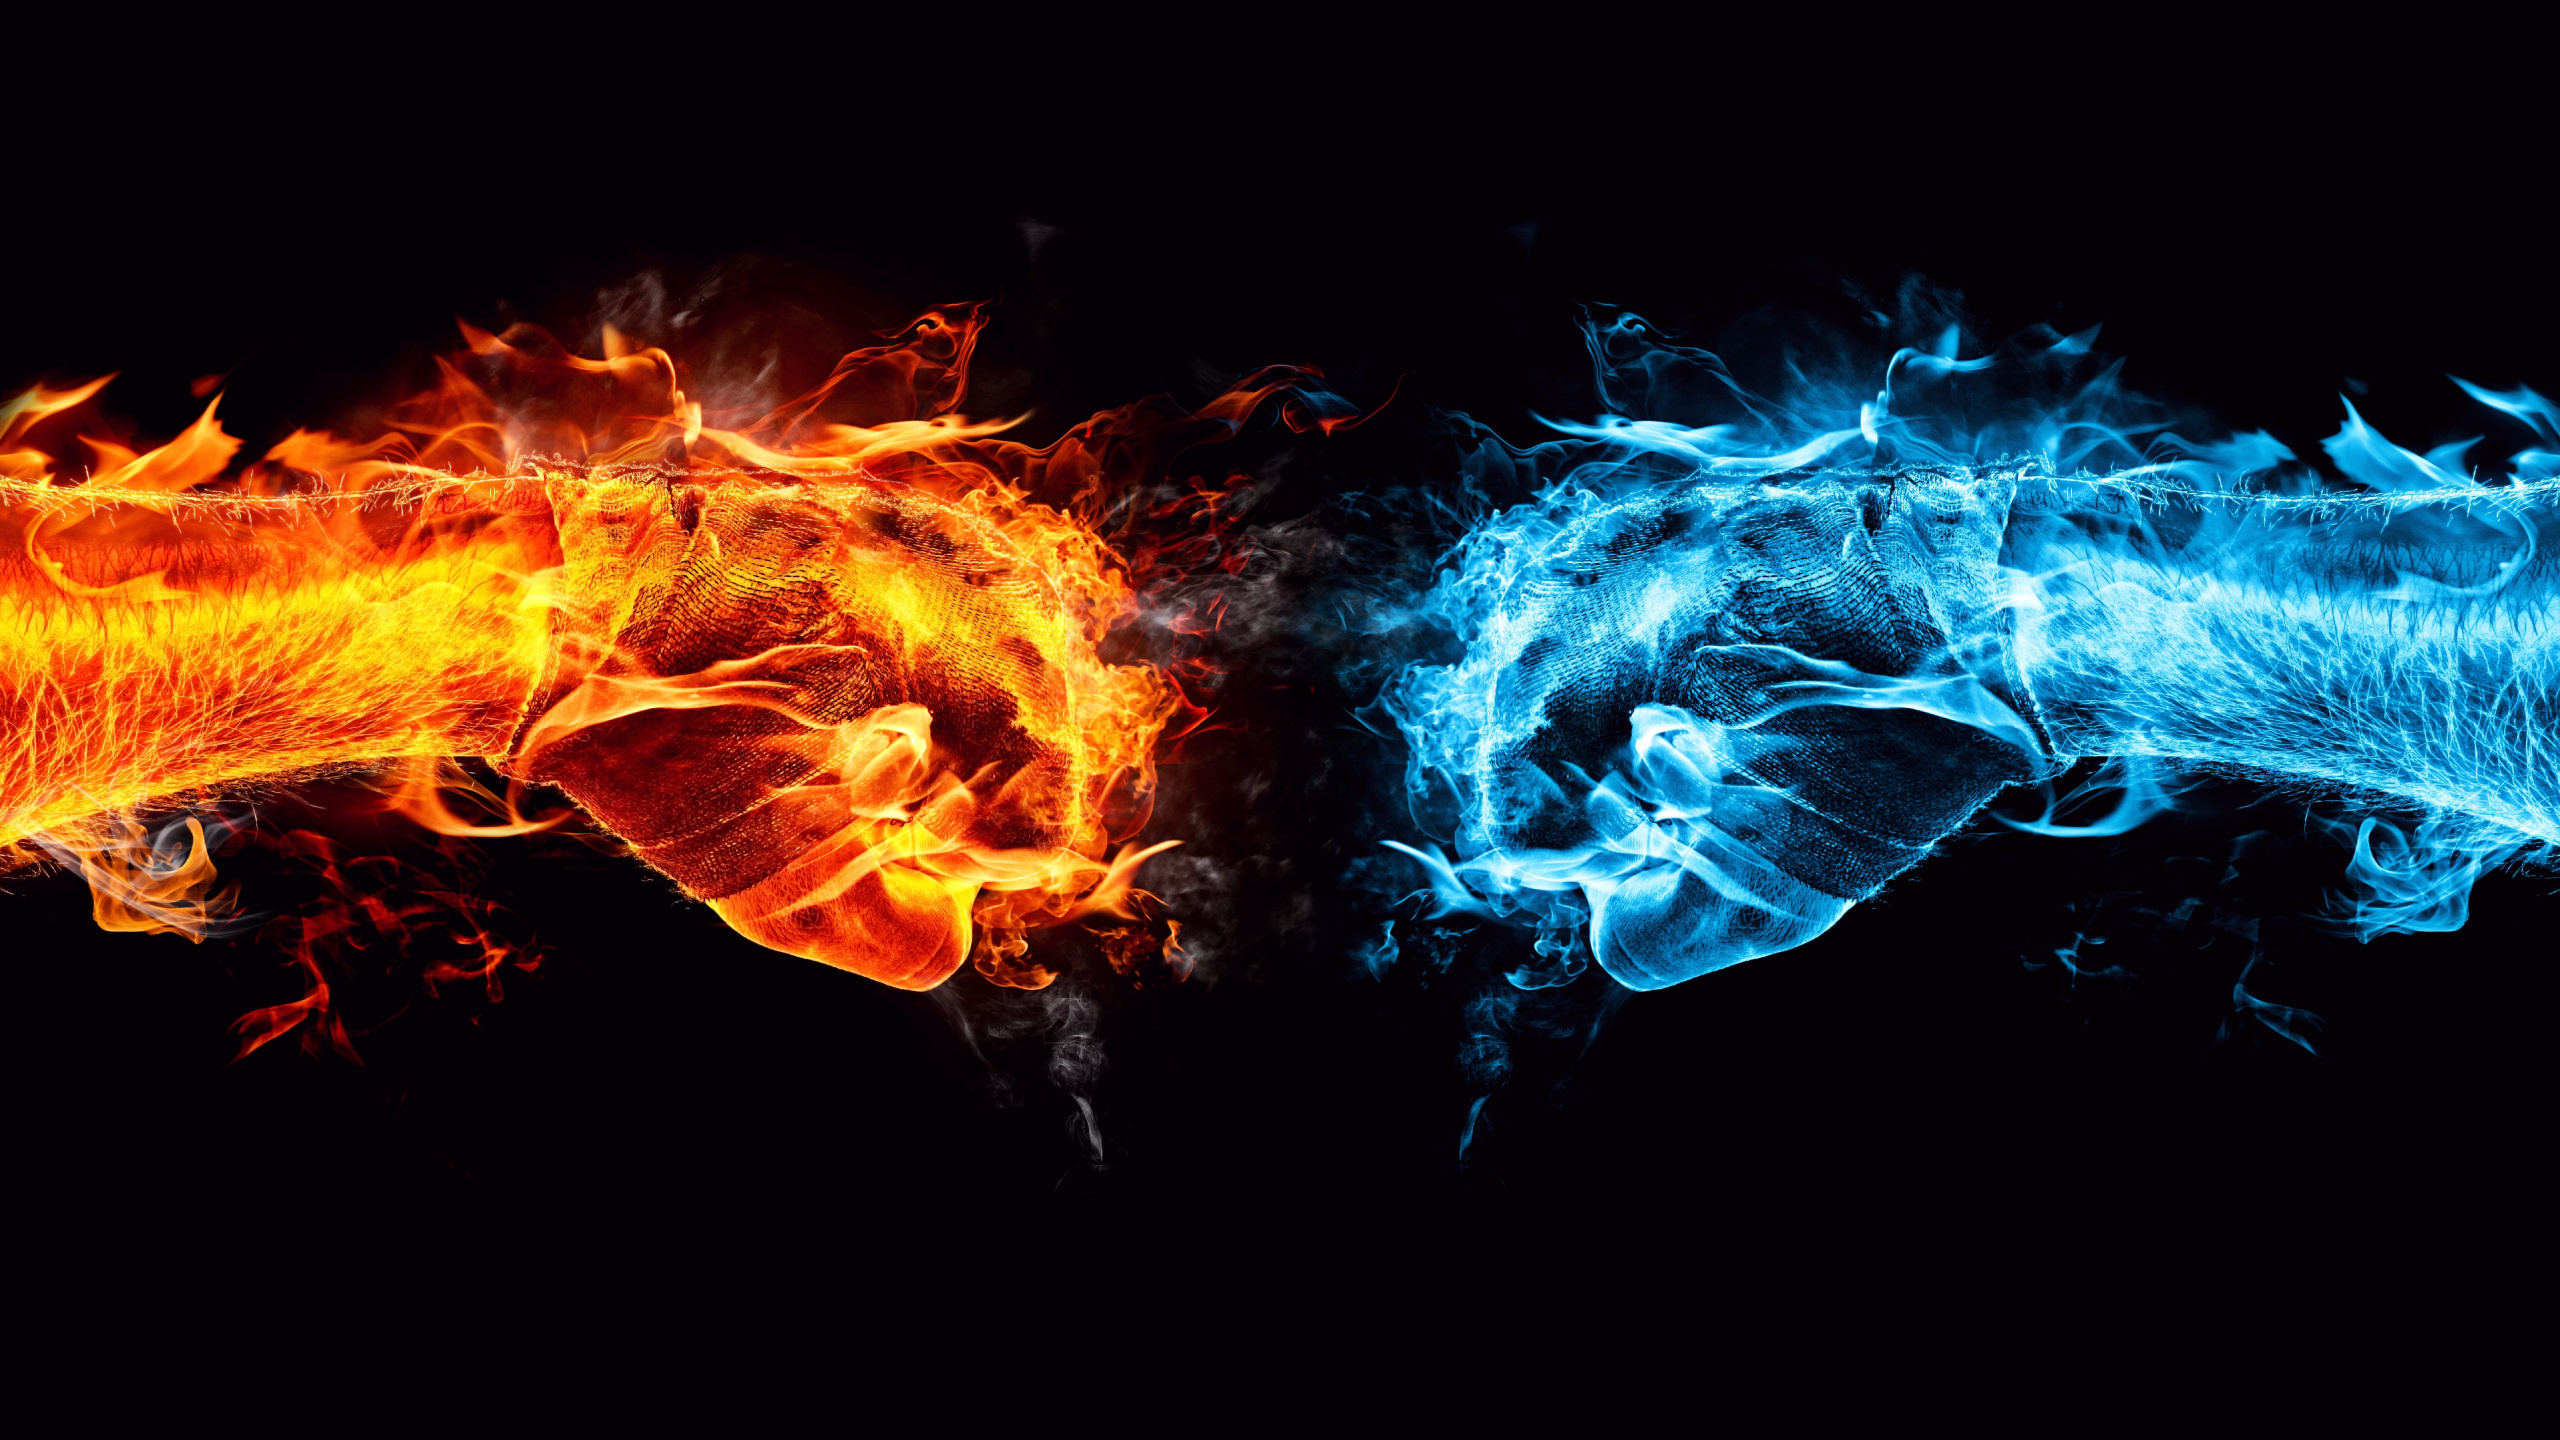 Blue and Orange Flame Illustration. Wallpaper in 2560x1440 Resolution